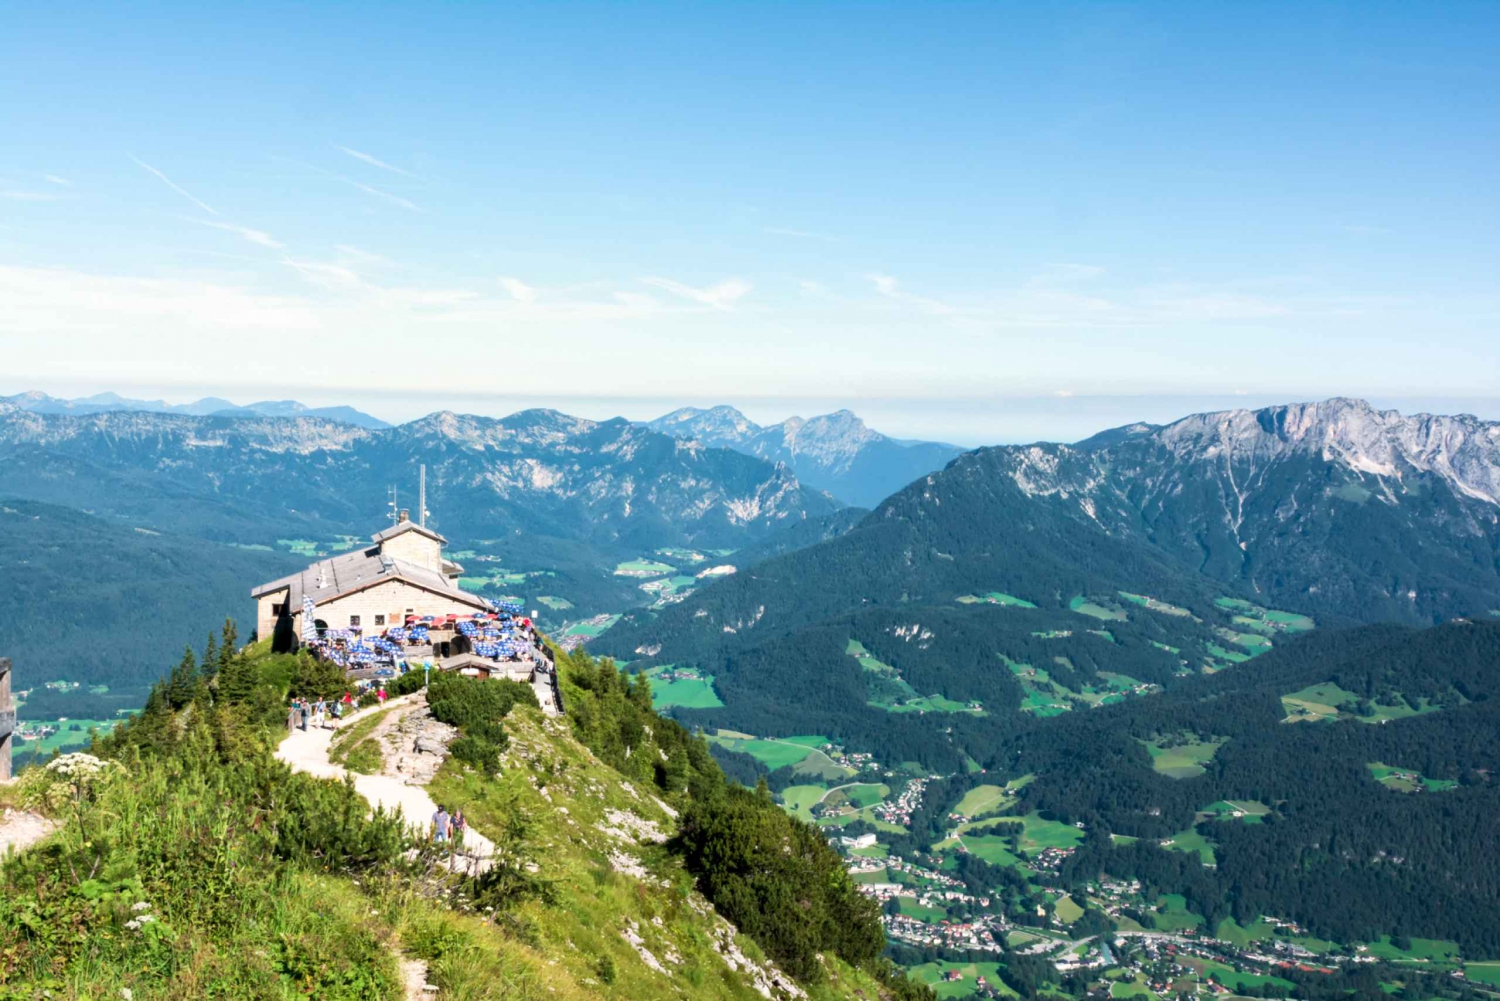 Eagle's Nest Tour from Munich: Groups of 4 or More